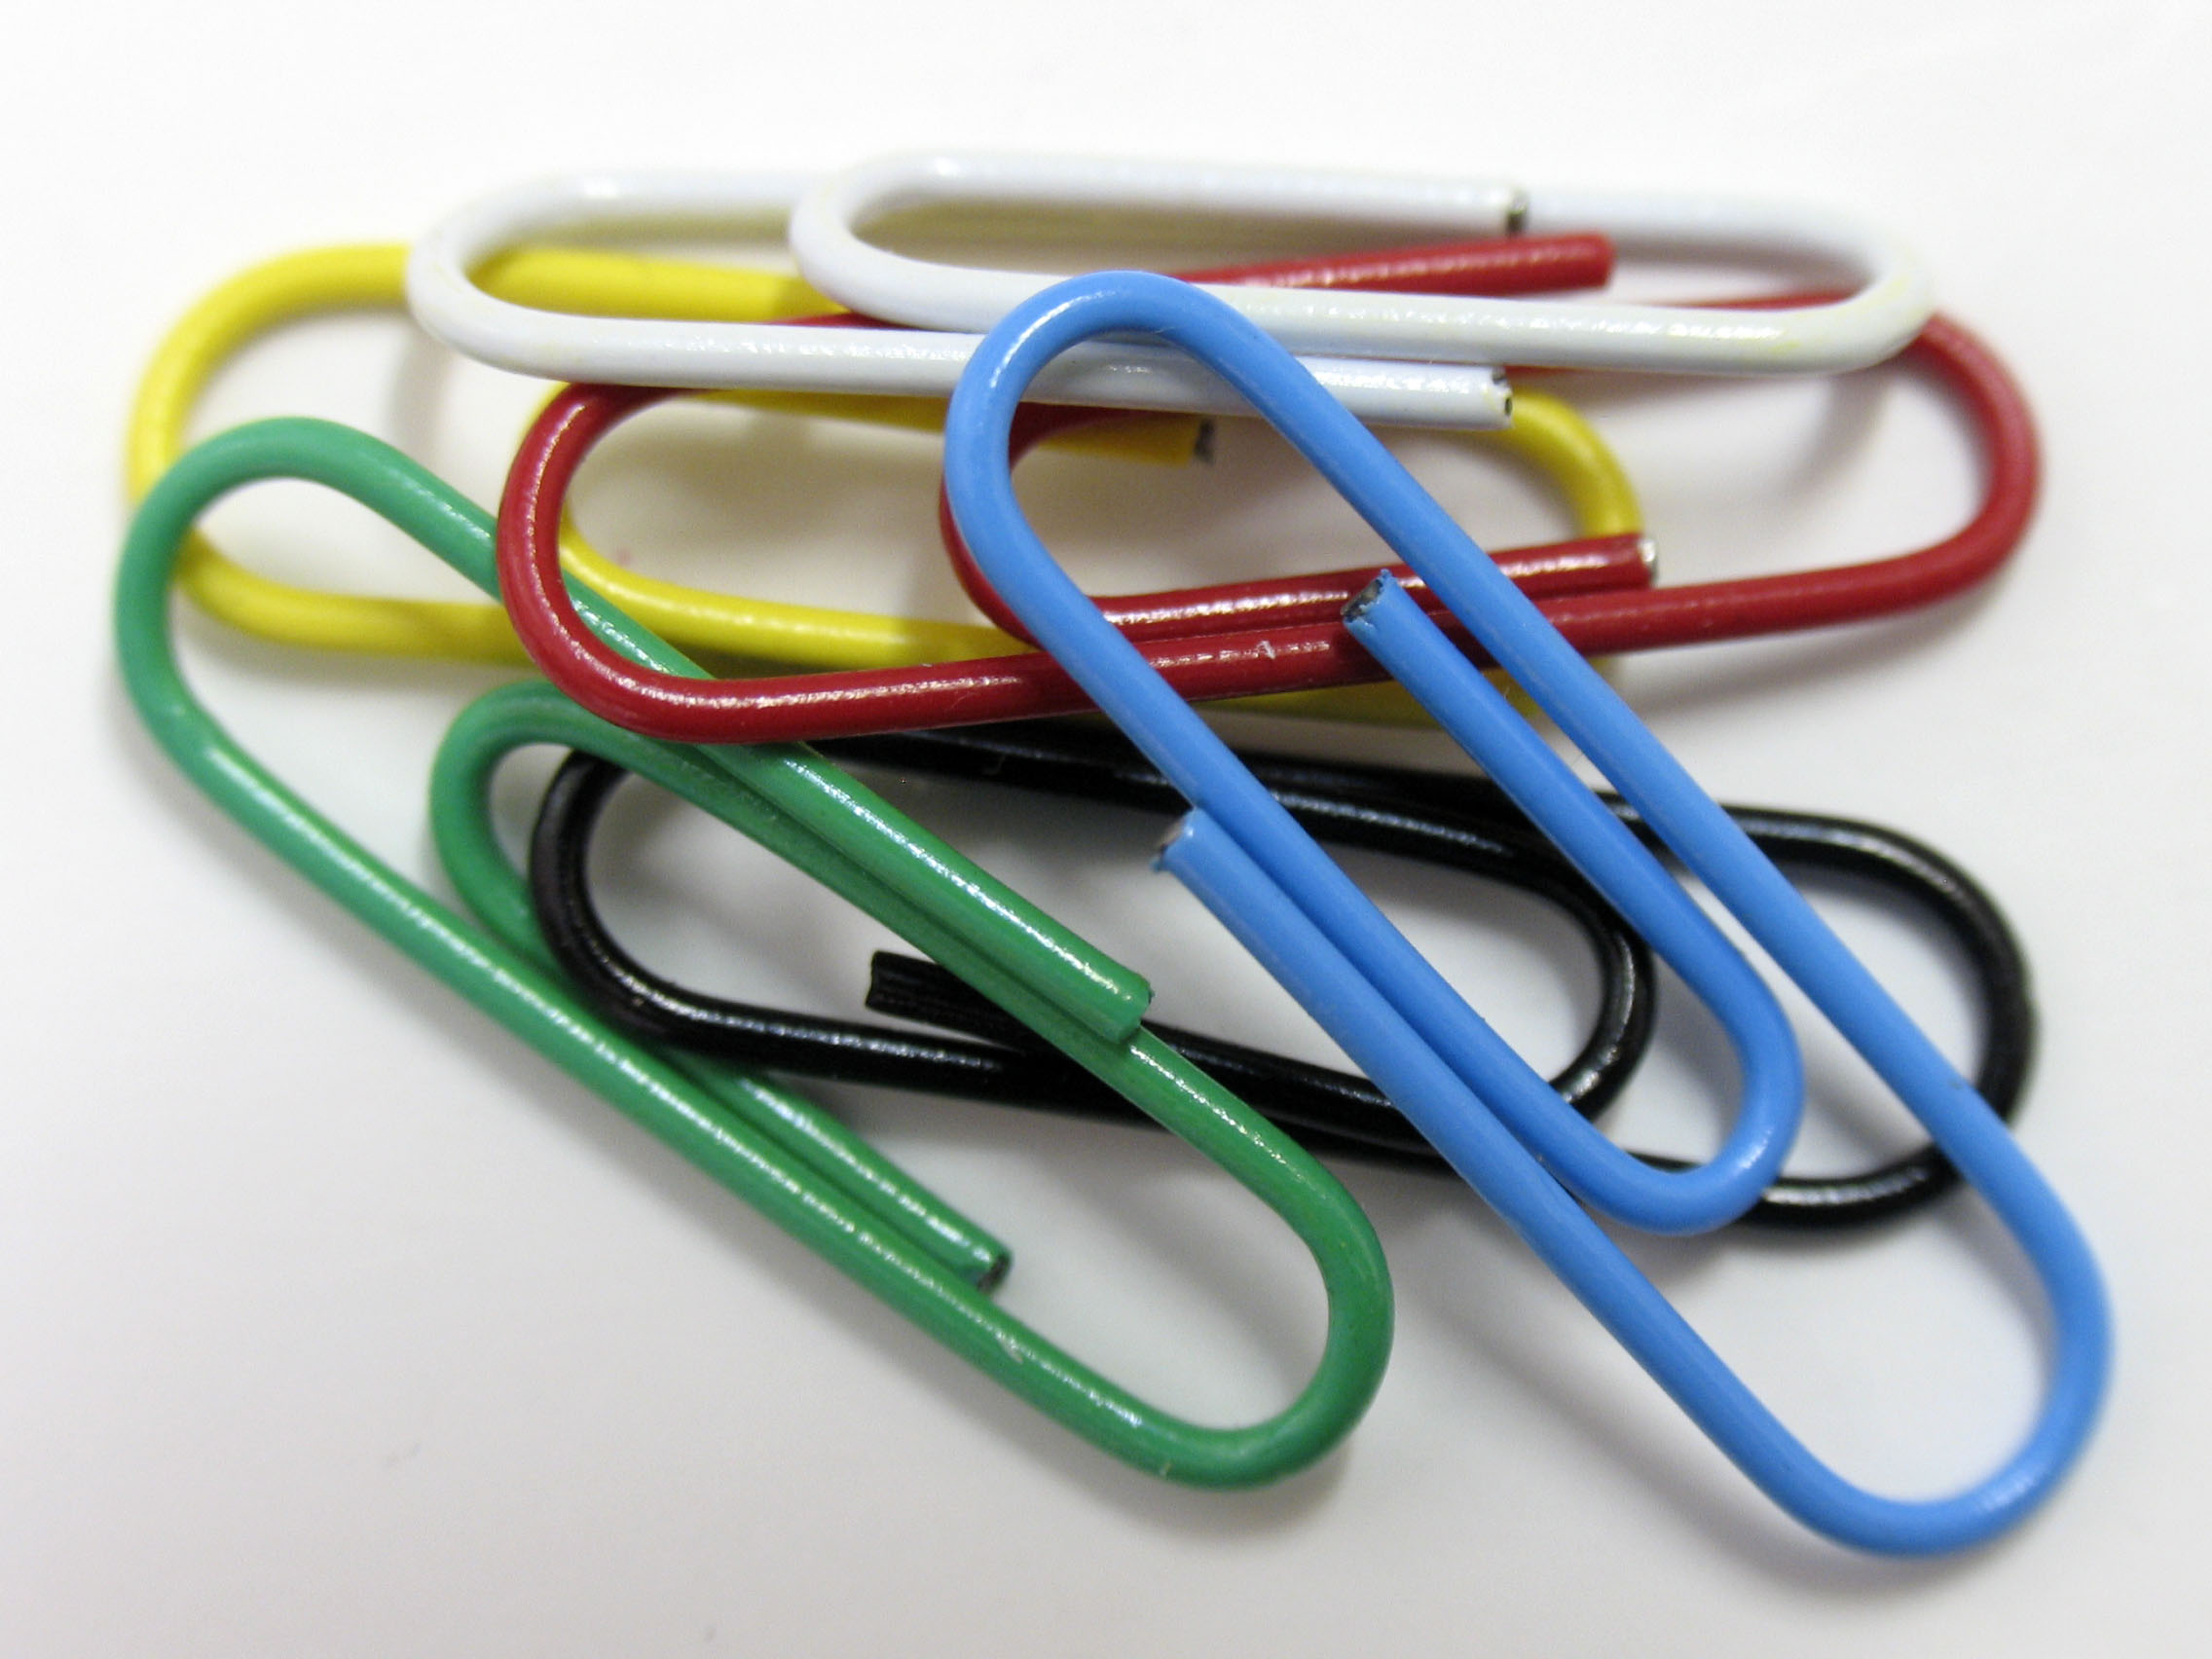 Colored paper clips photo